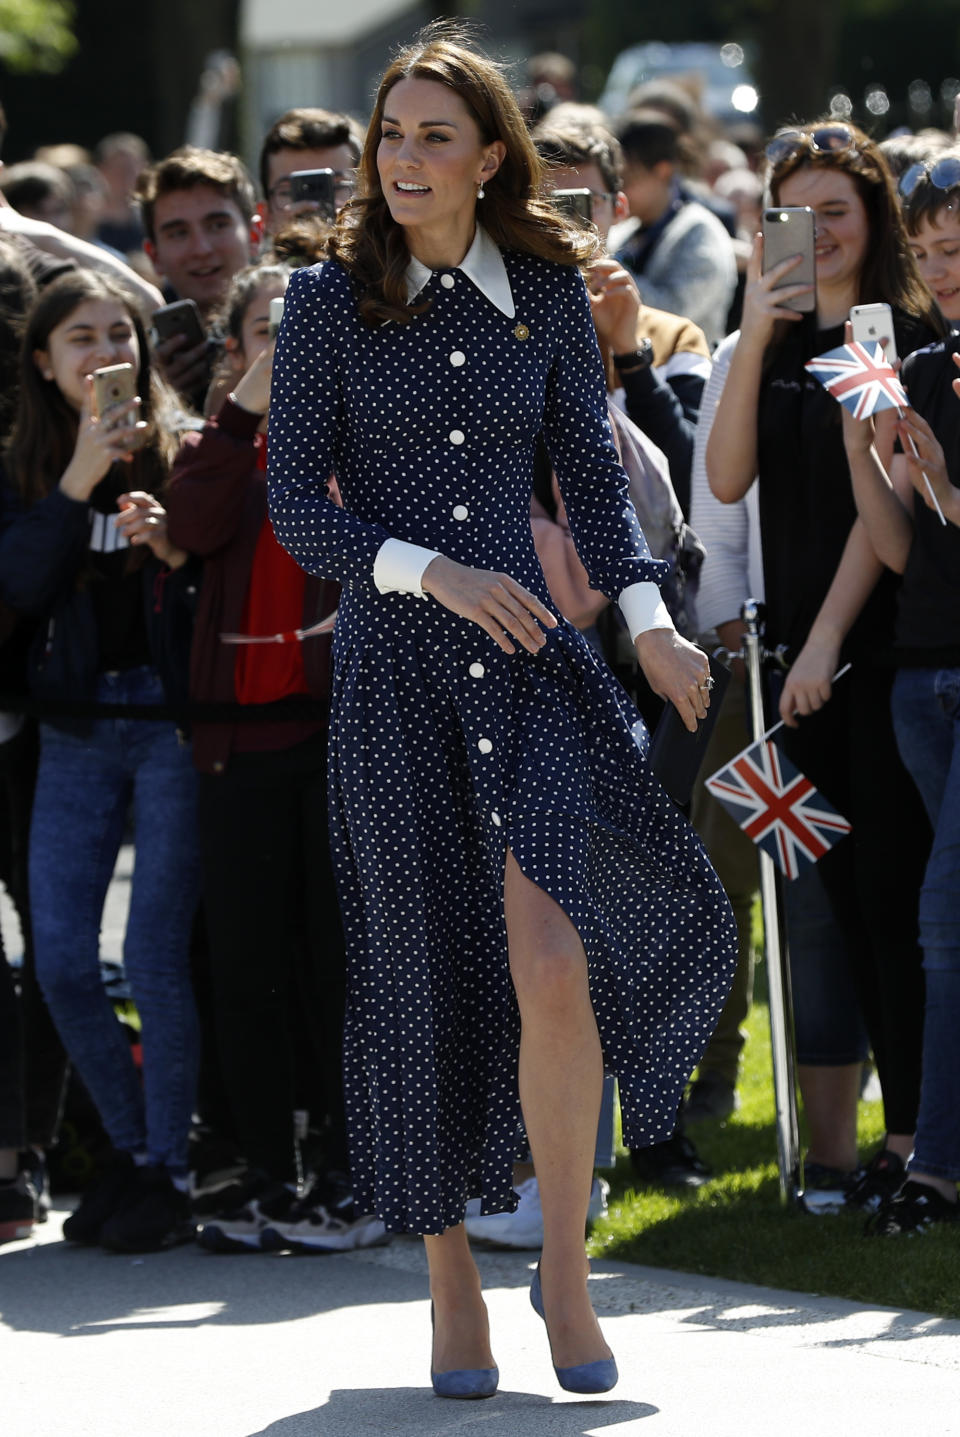 The Duchess of Cambridge at Bletchley Park on May 14, 2019. (Getty Images)